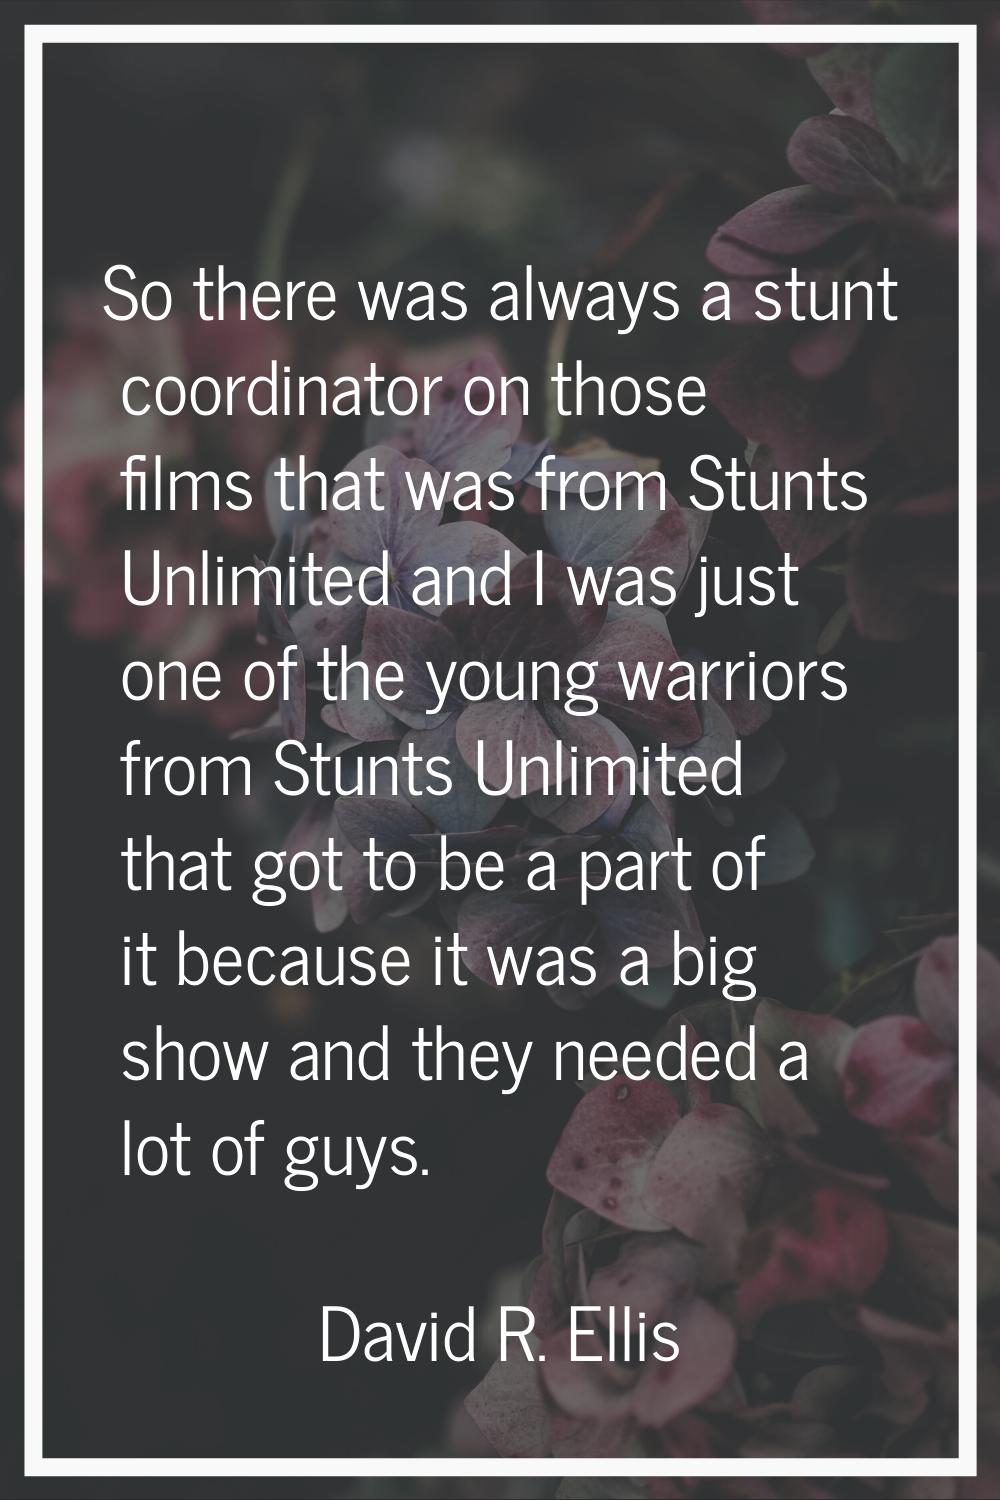 So there was always a stunt coordinator on those films that was from Stunts Unlimited and I was jus